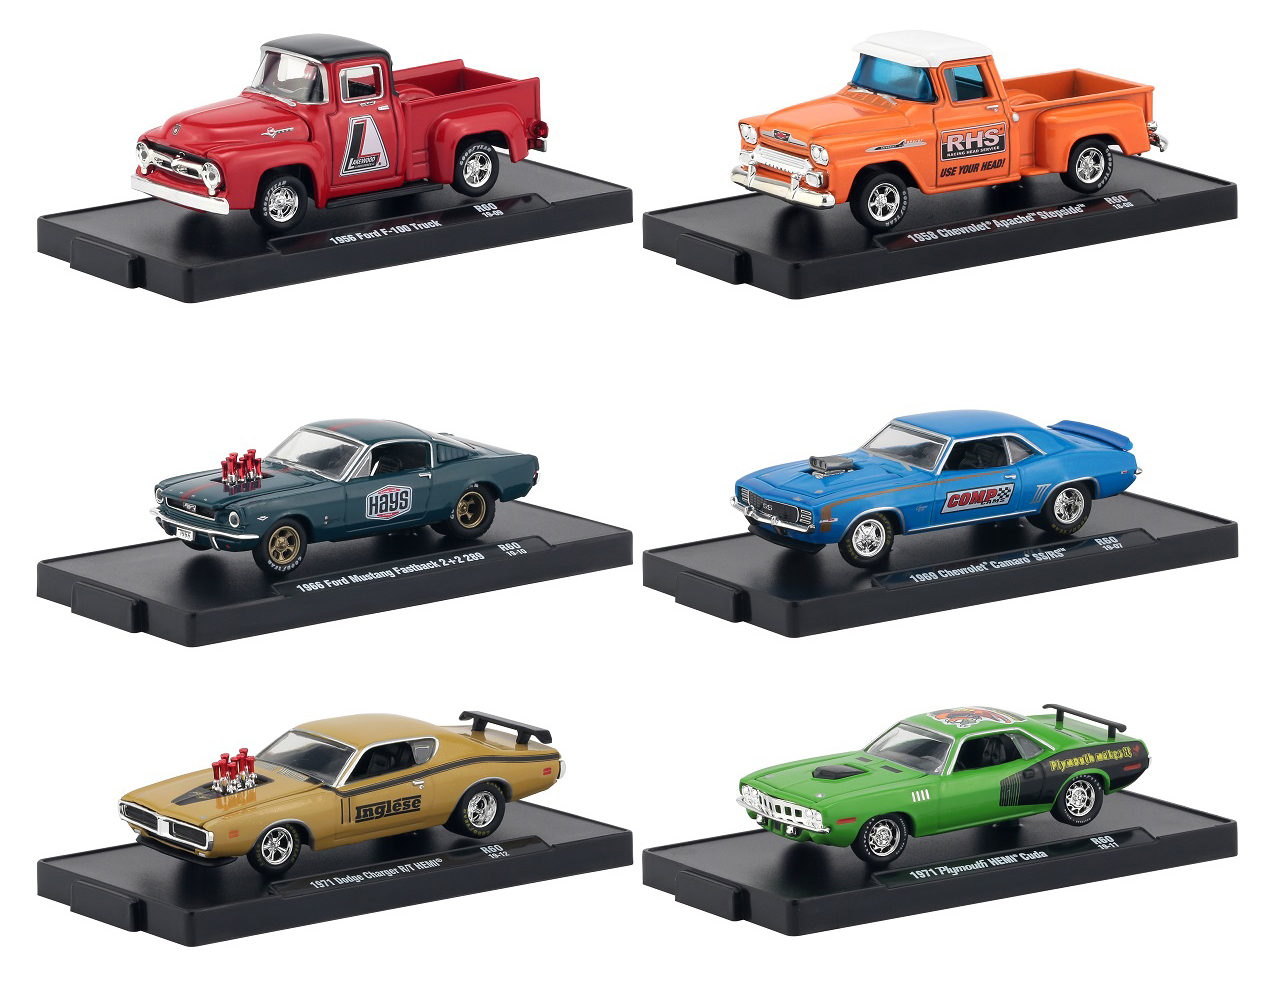 Drivers 6 Cars Set Release 60 In Blister Packs 1/64 Diecast Model Cars By M2 Machines